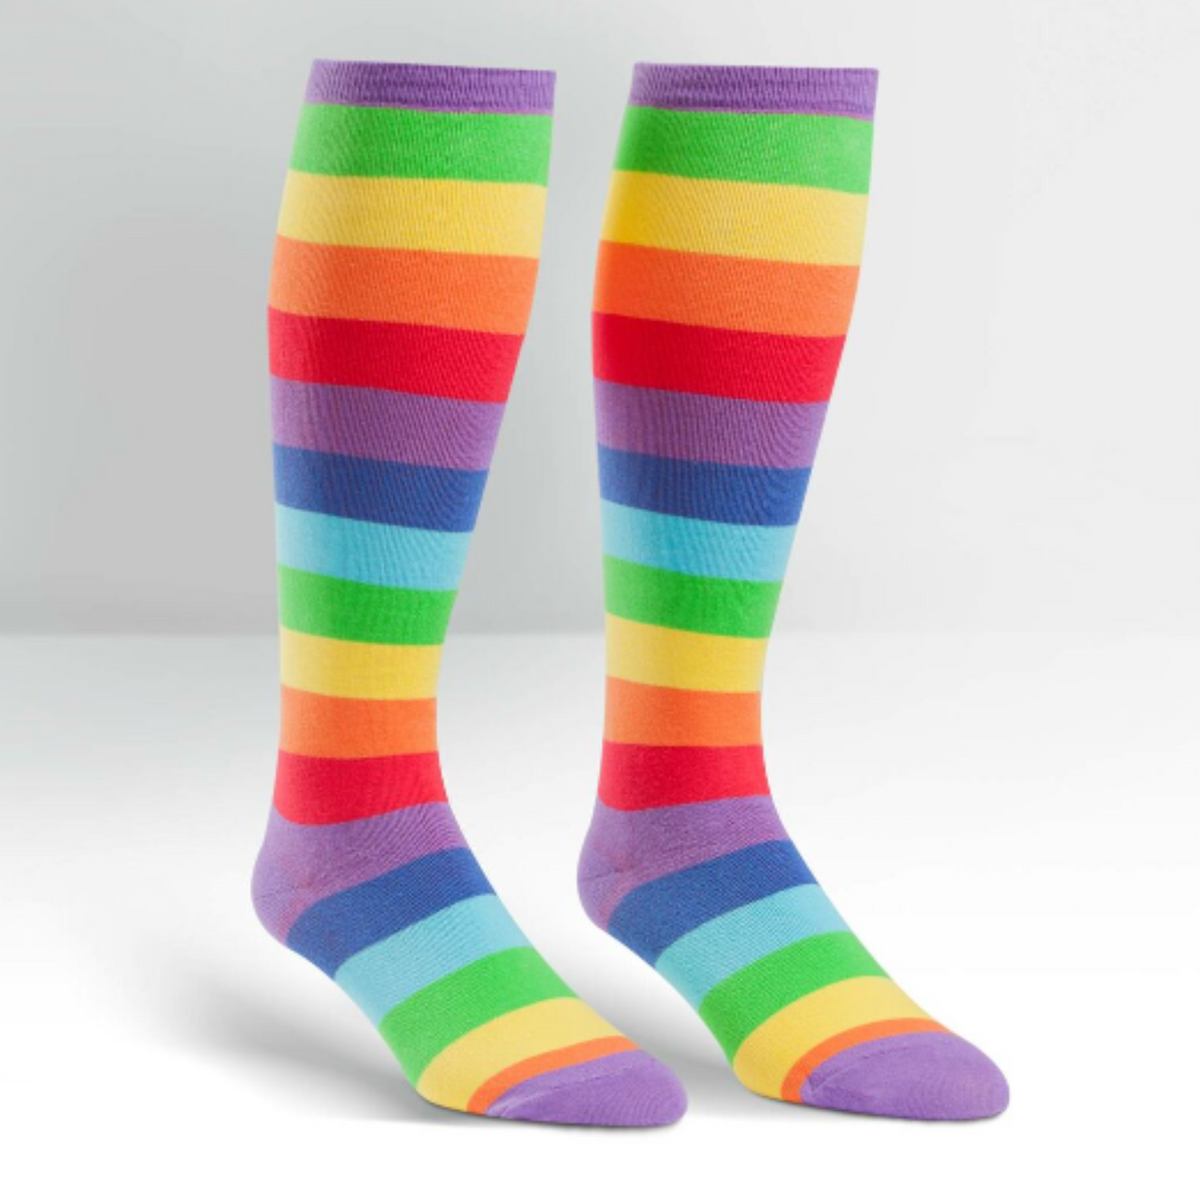 Sock It To Me Super Juicy extra-stretchy knee high socks featuring rainbow stripes all over. Socks shown on display feet from the side. 